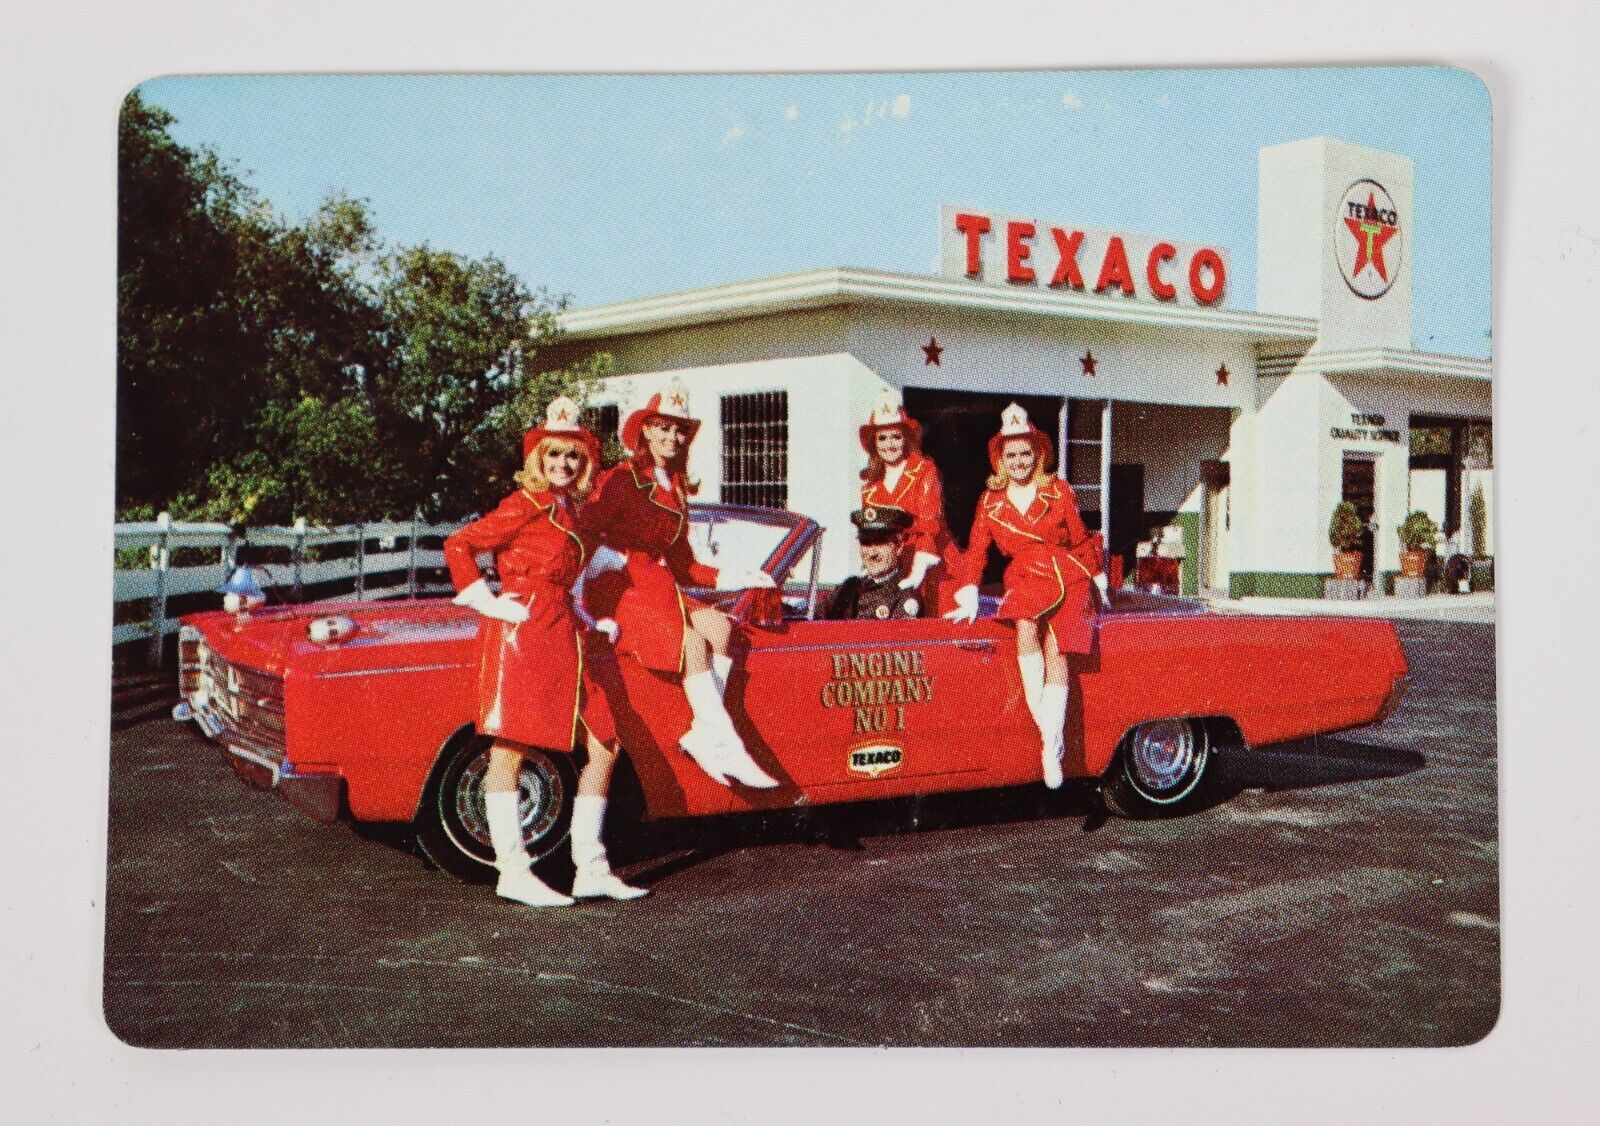 1968 Texaco Oil and Gas Station Pocket Calendar w/ Women Firefighters Vintage